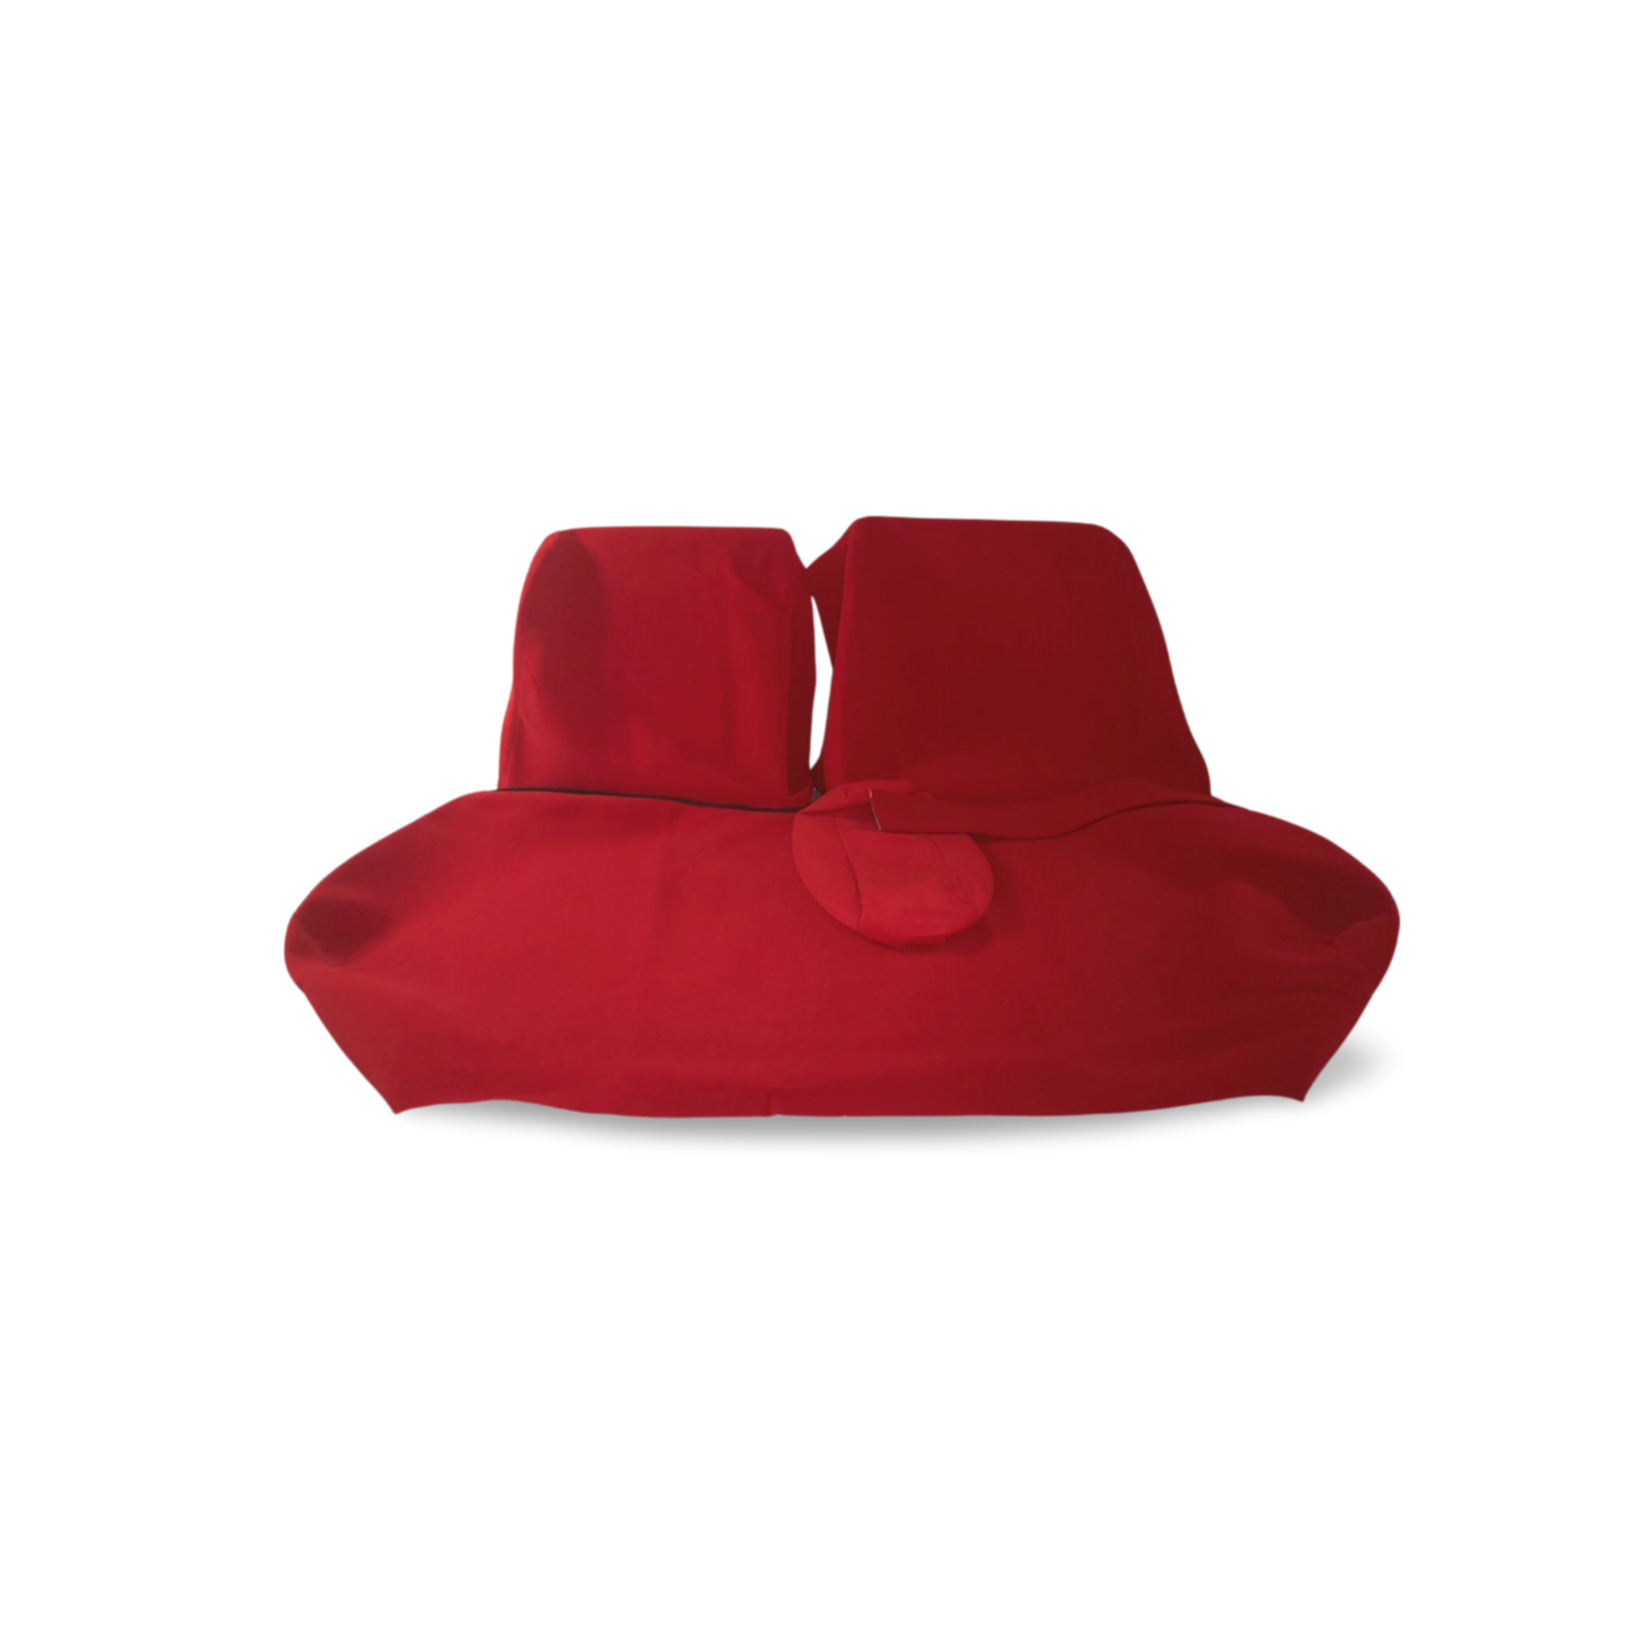 Upholstery set Jersey red 16/74 (with armrest bench 14cm) non Pallas -07/62 Nr Org: Interior - Image 16/74